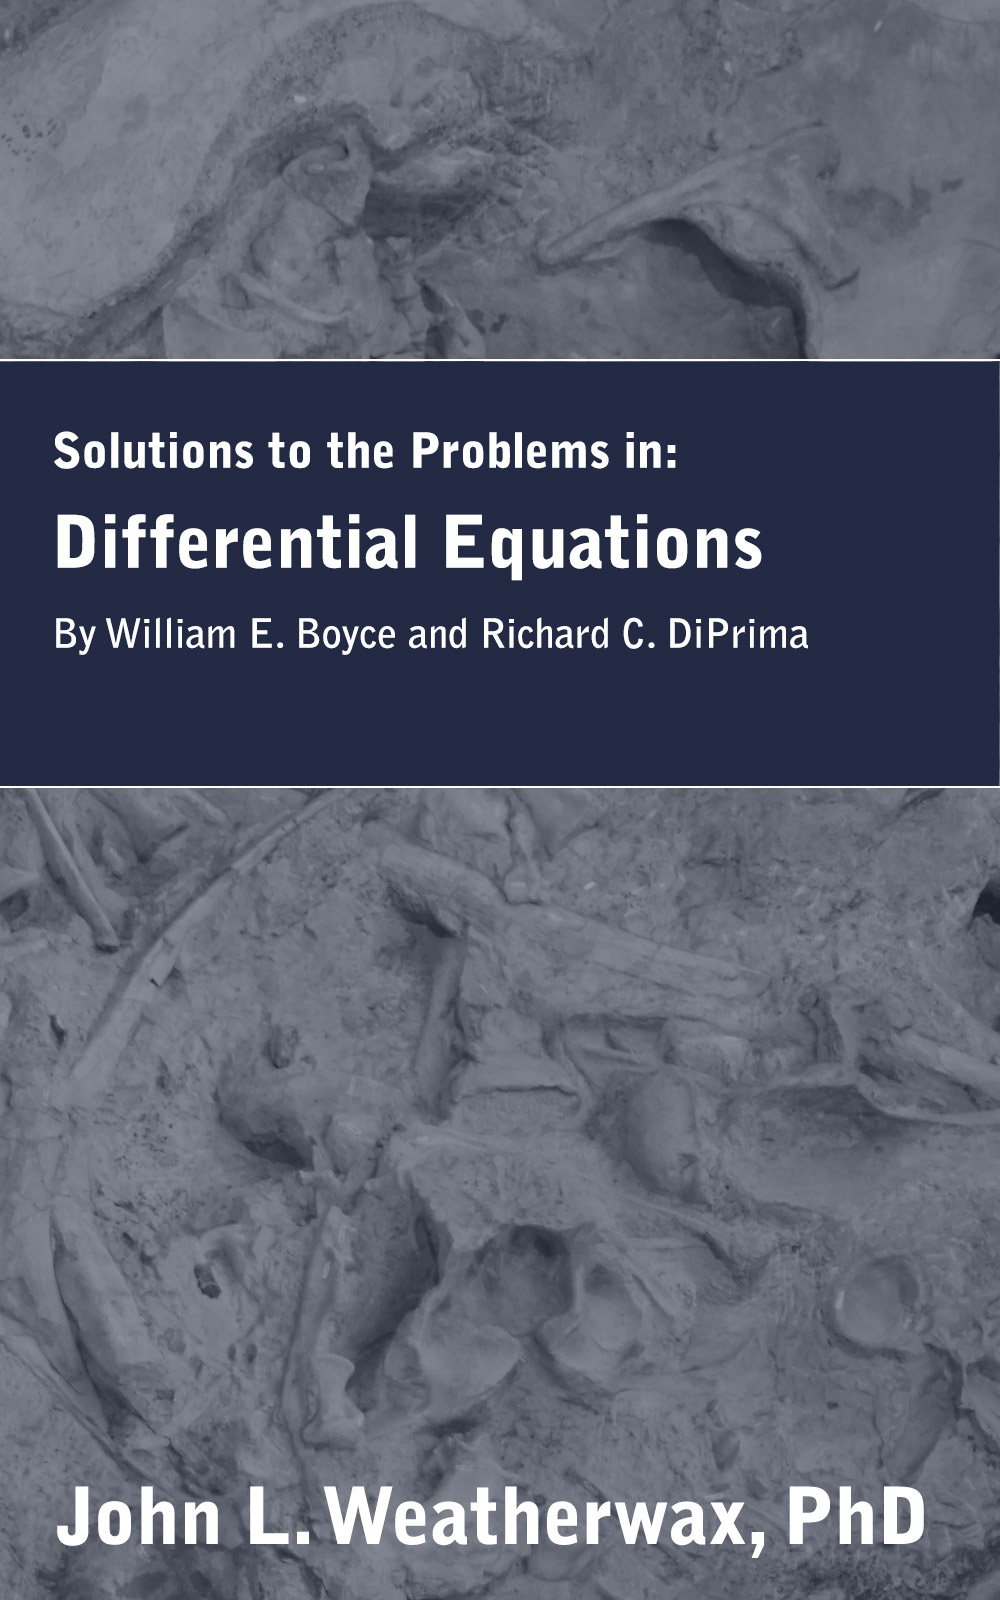 Solutions and Notes for: Differential Equations by William Boyce and Richard DiPrima